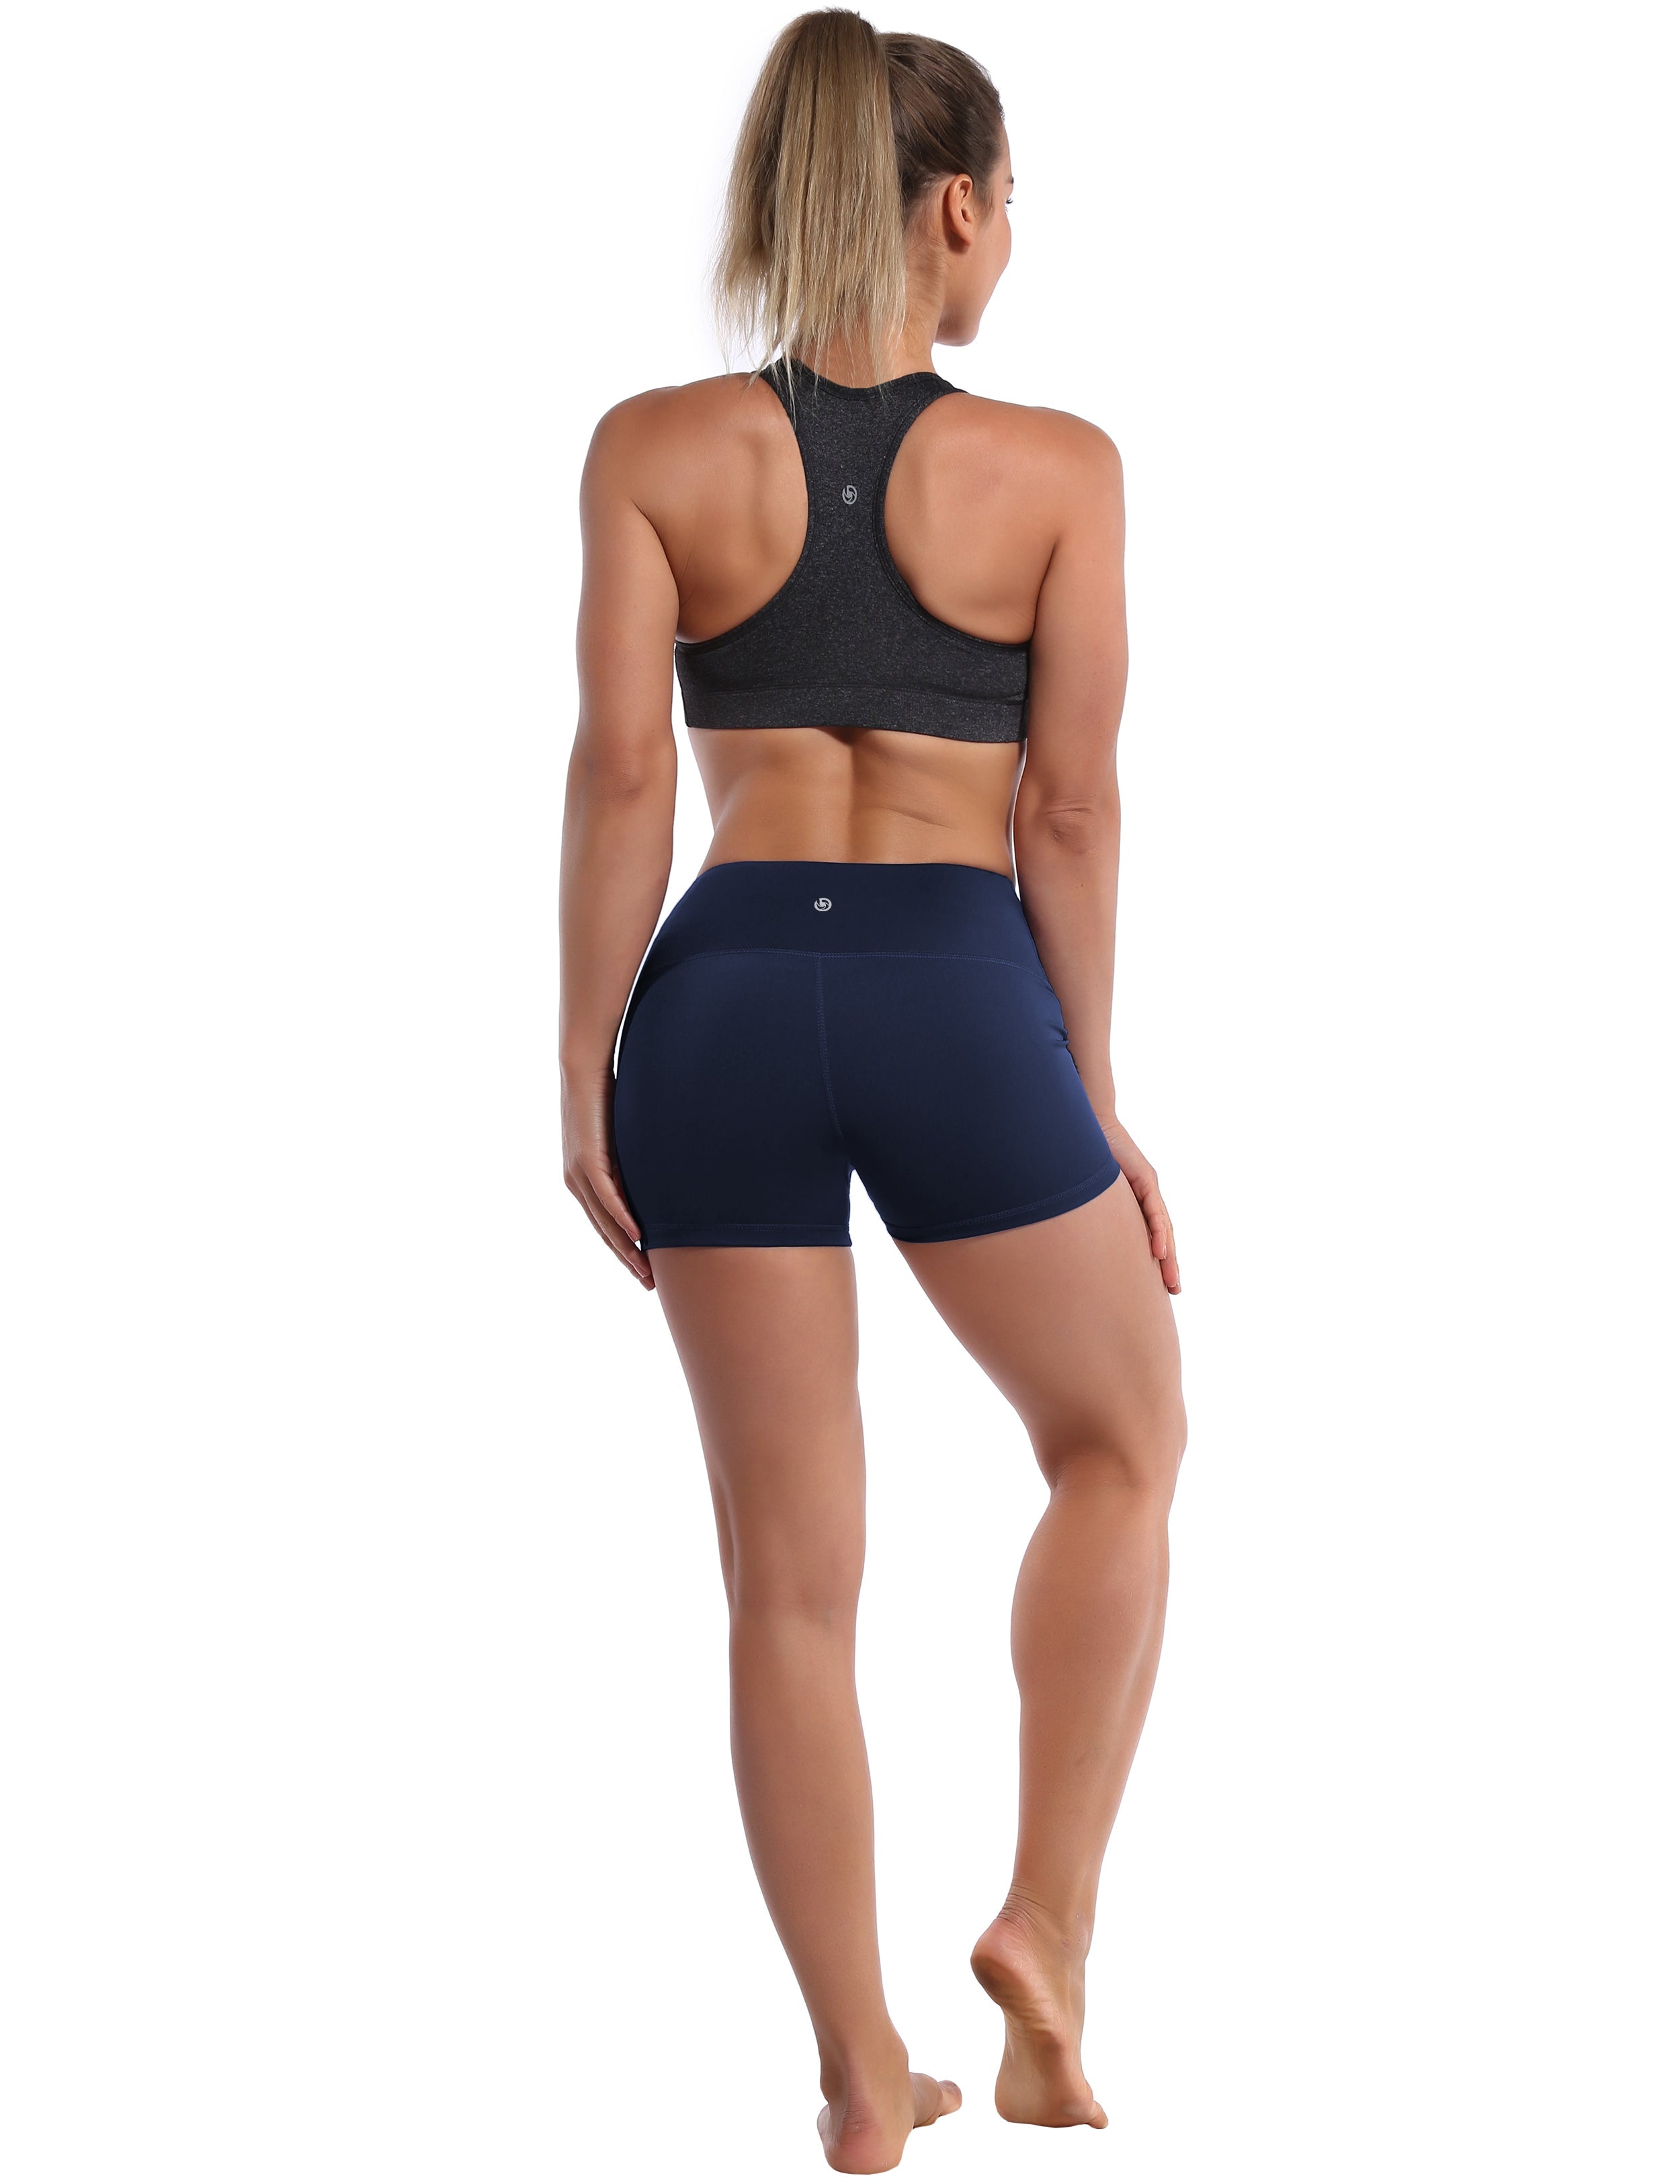 2.5" Pilates Shorts darknavy Softest-ever fabric High elasticity High density 4-way stretch Fabric doesn't attract lint easily No see-through Moisture-wicking Machine wash 75% Nylon, 25% Spandex